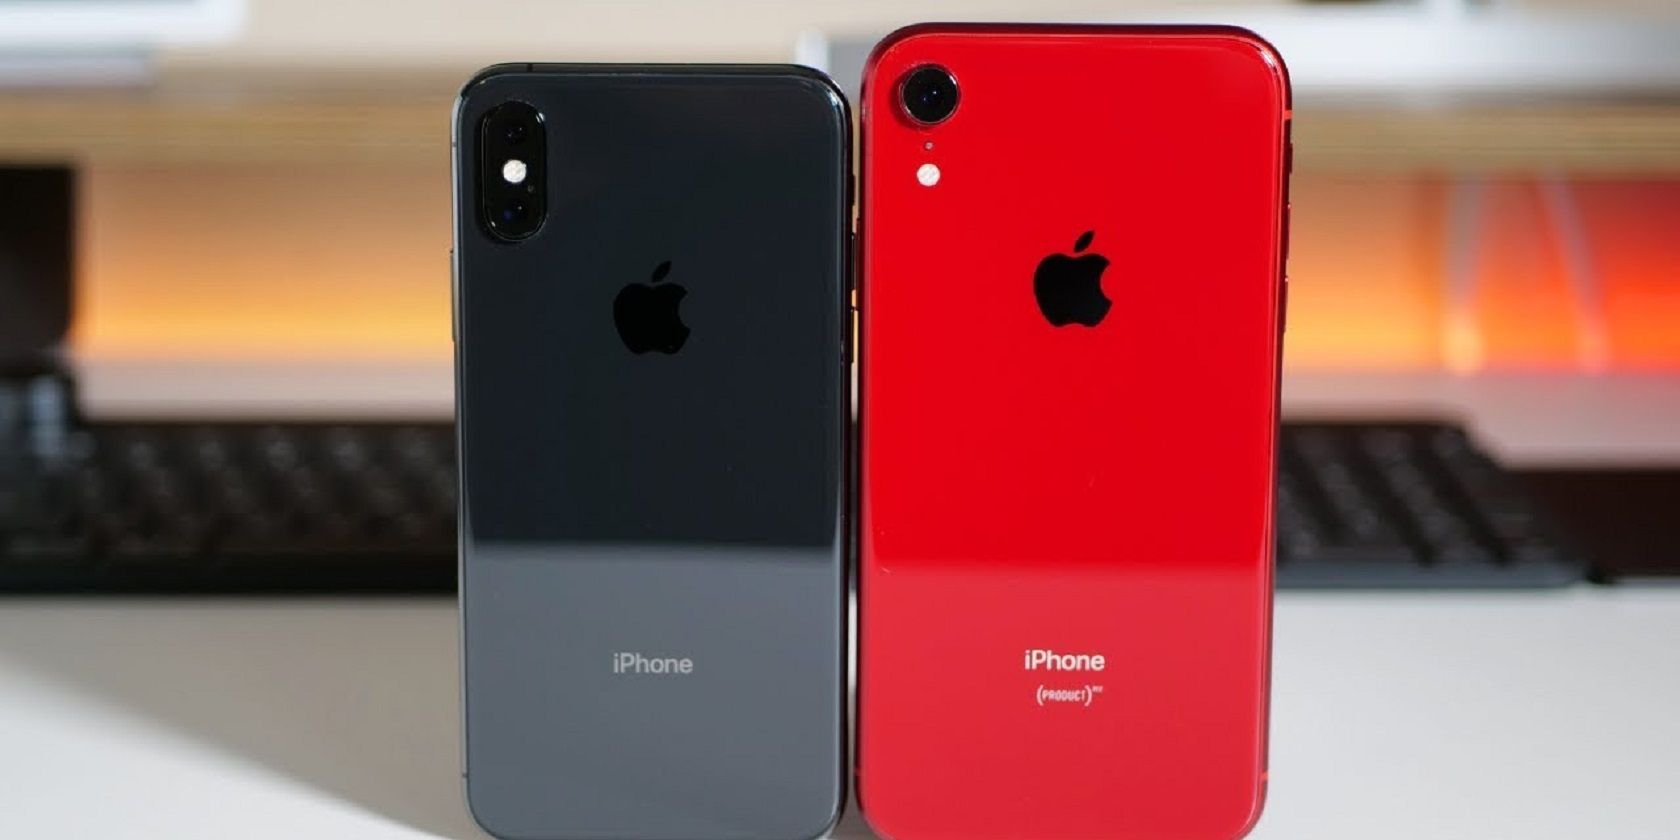 iPhone XR and iPhone XS